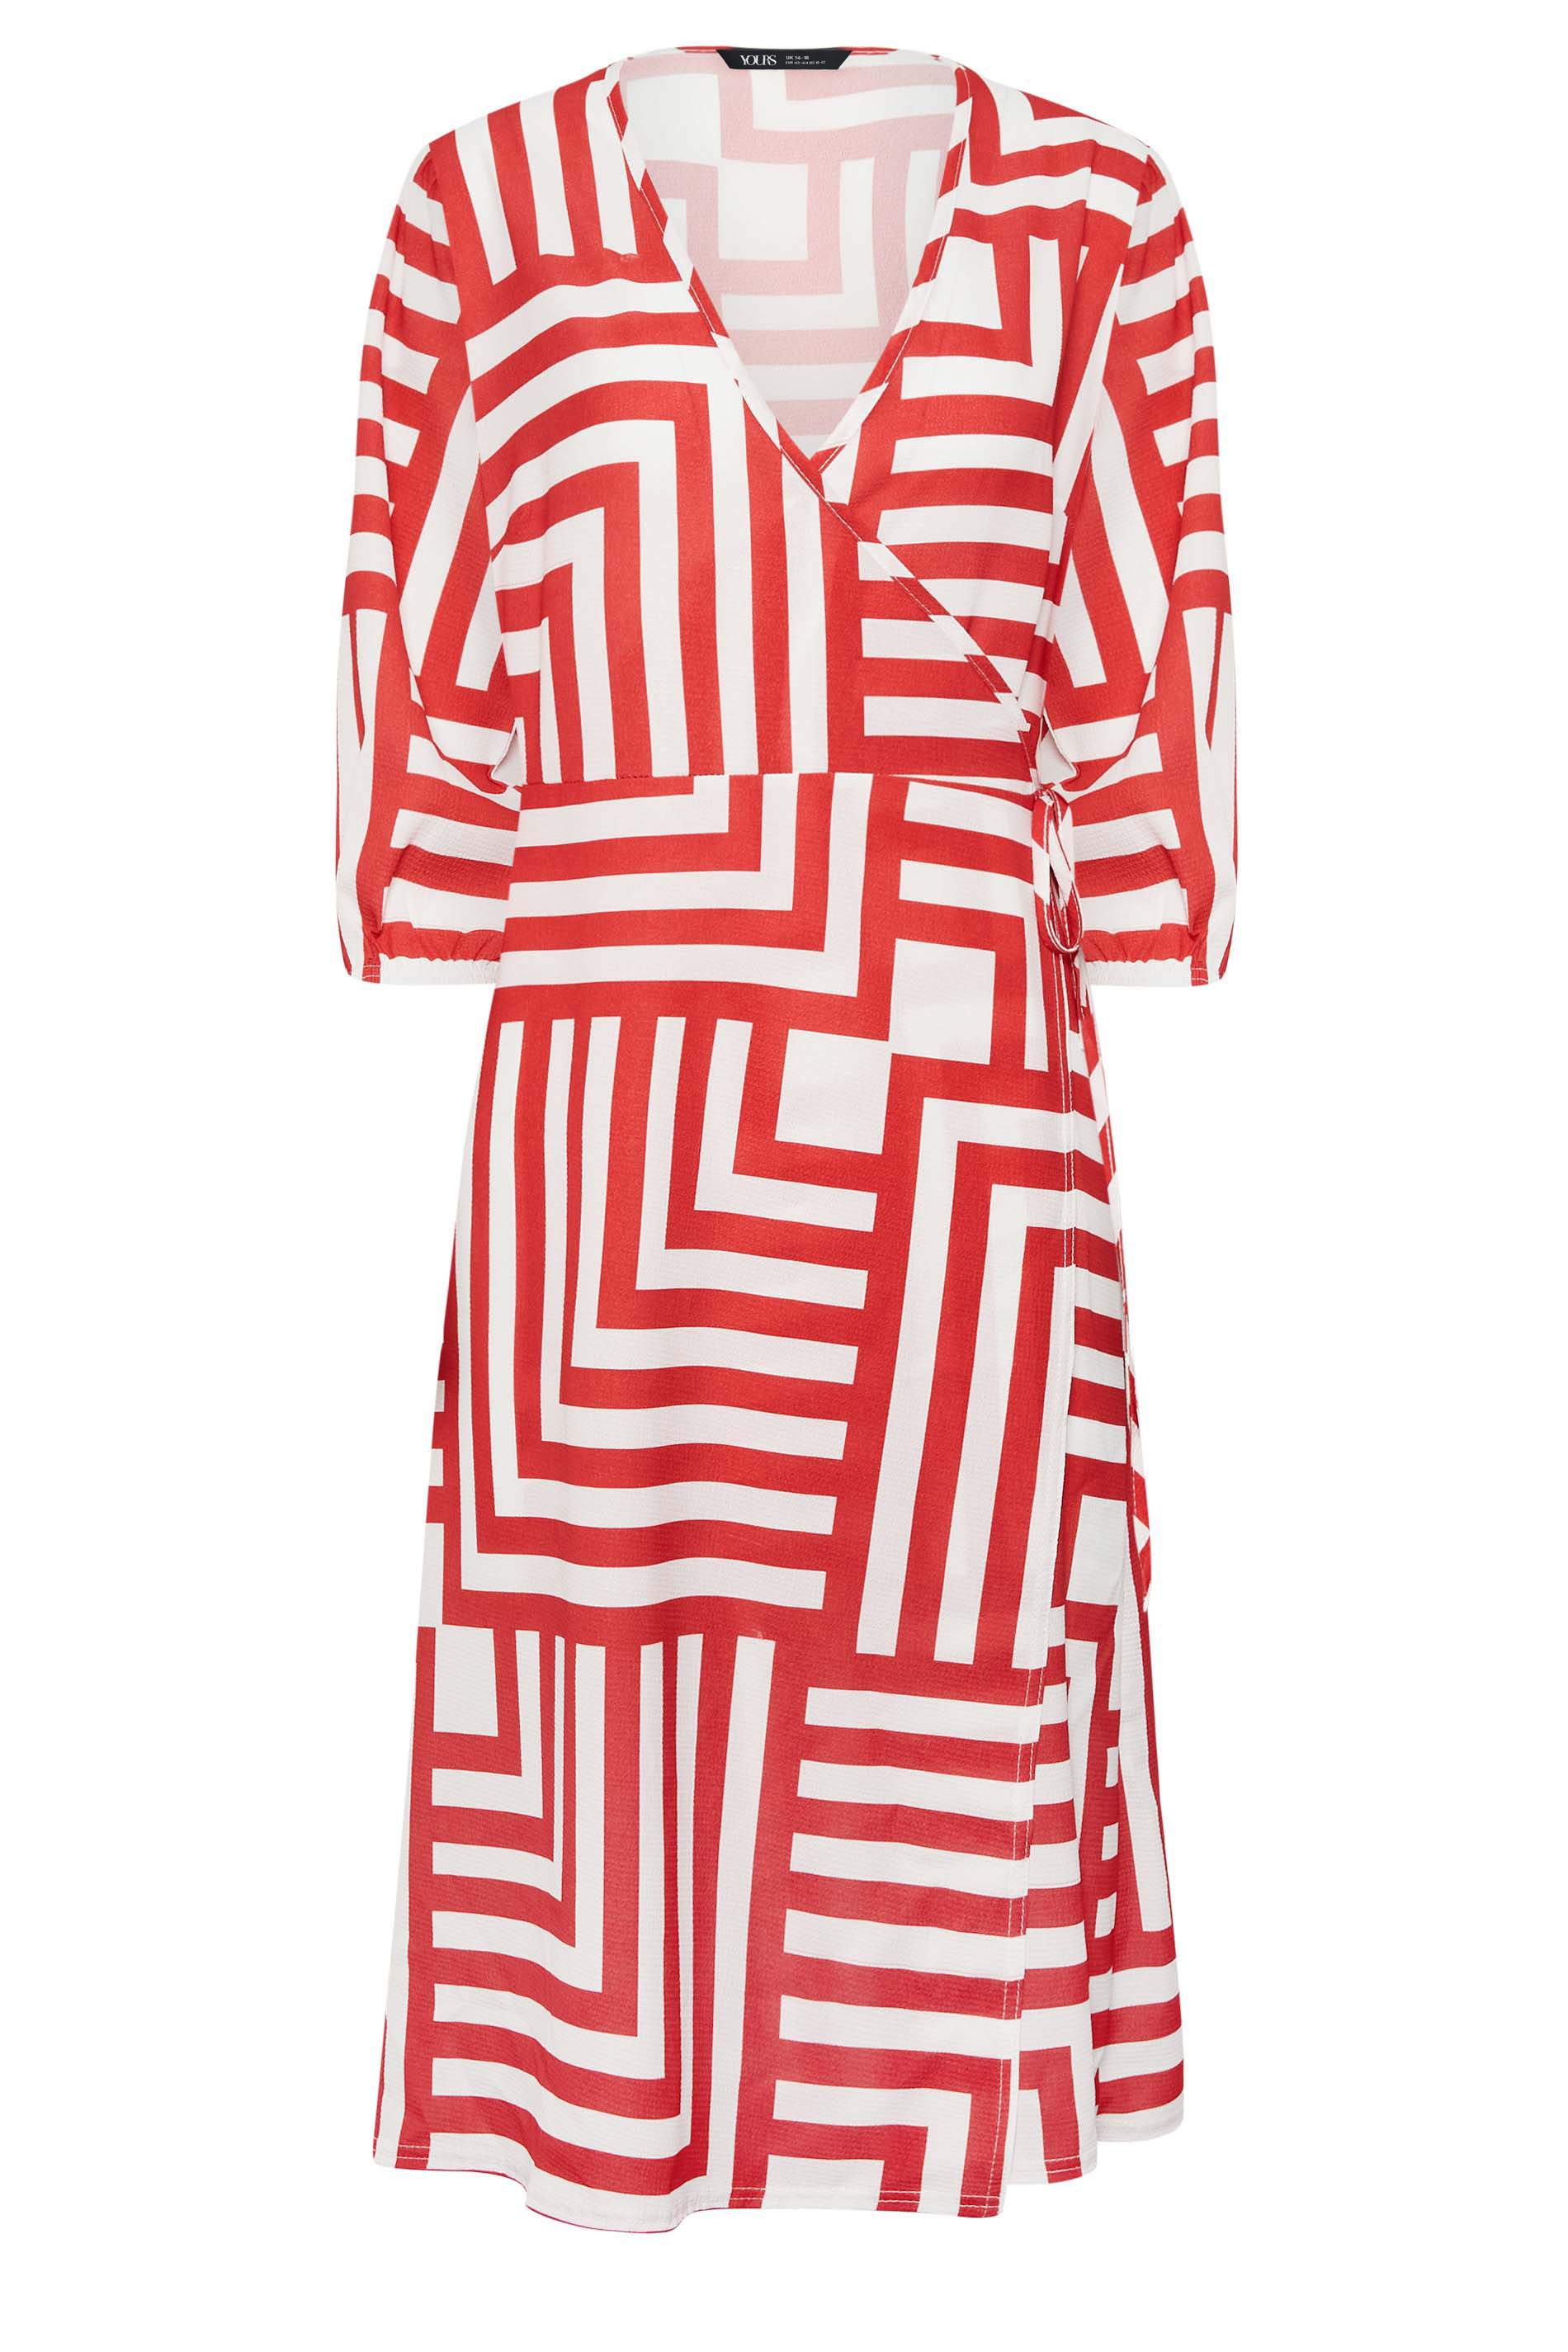 YOURS PETITE Plus Size Red Geometric Print Wrap Dress | Yours Clothing 1